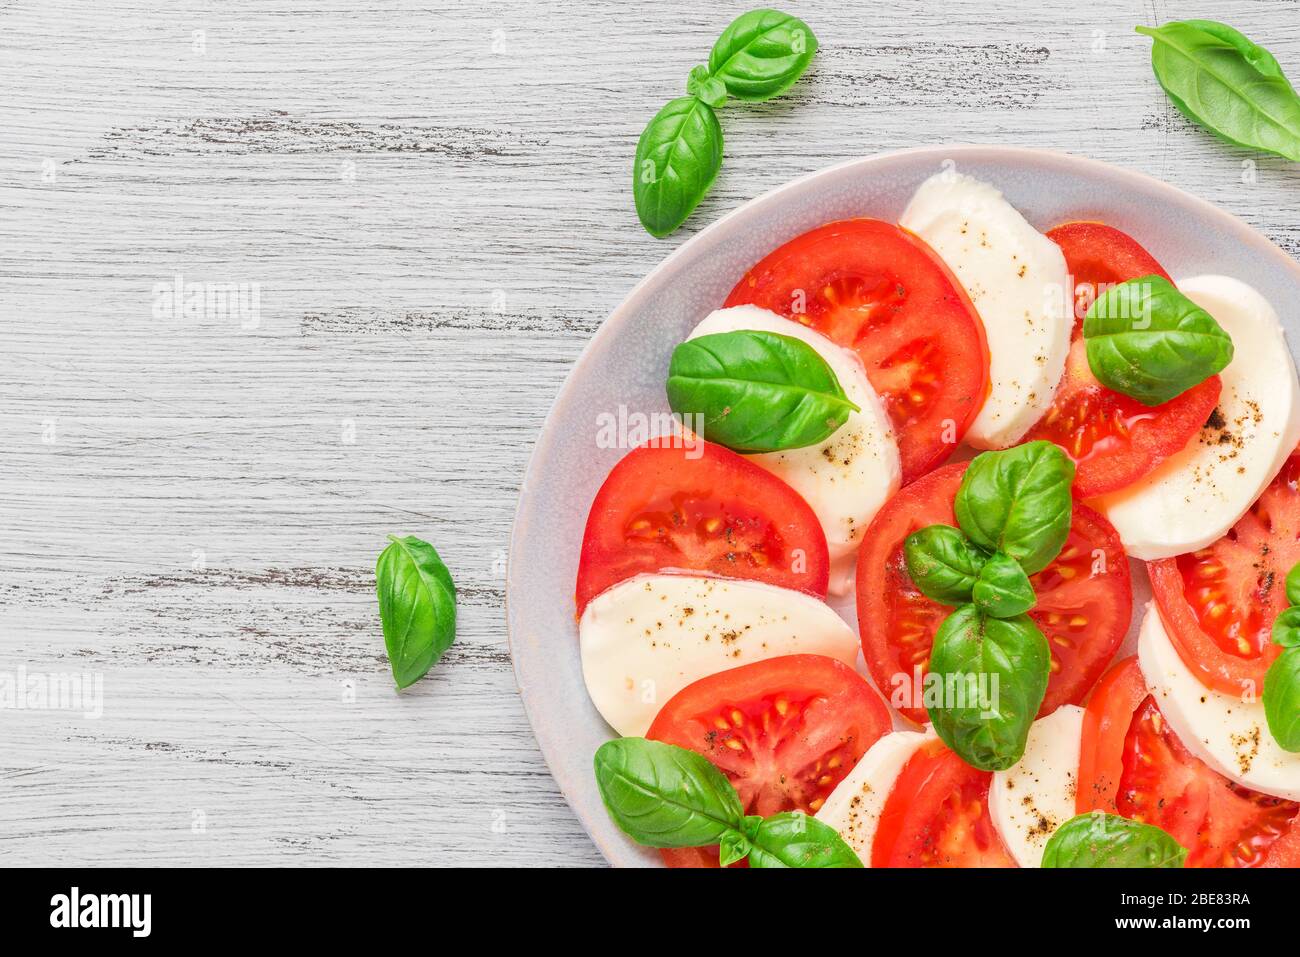 Healthy caprese salad with ripe tomatoes and mozzarella cheese with fresh basil leaves. Italian food. top view with copy space Stock Photo